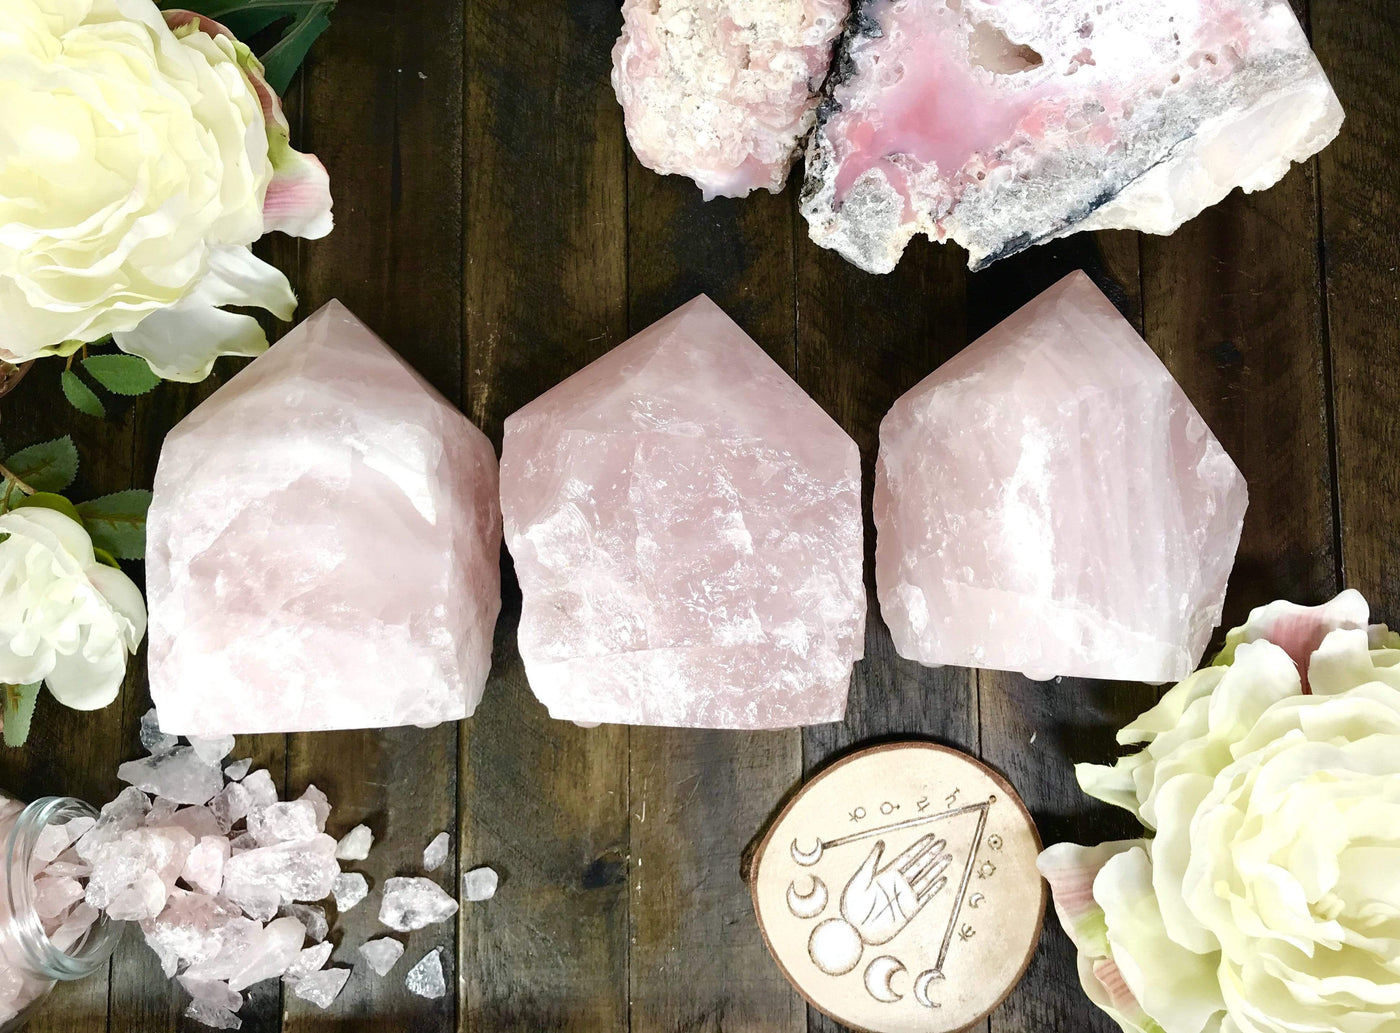 3 rose Quartz lamps lined up with other crystals and flowers on wooden table